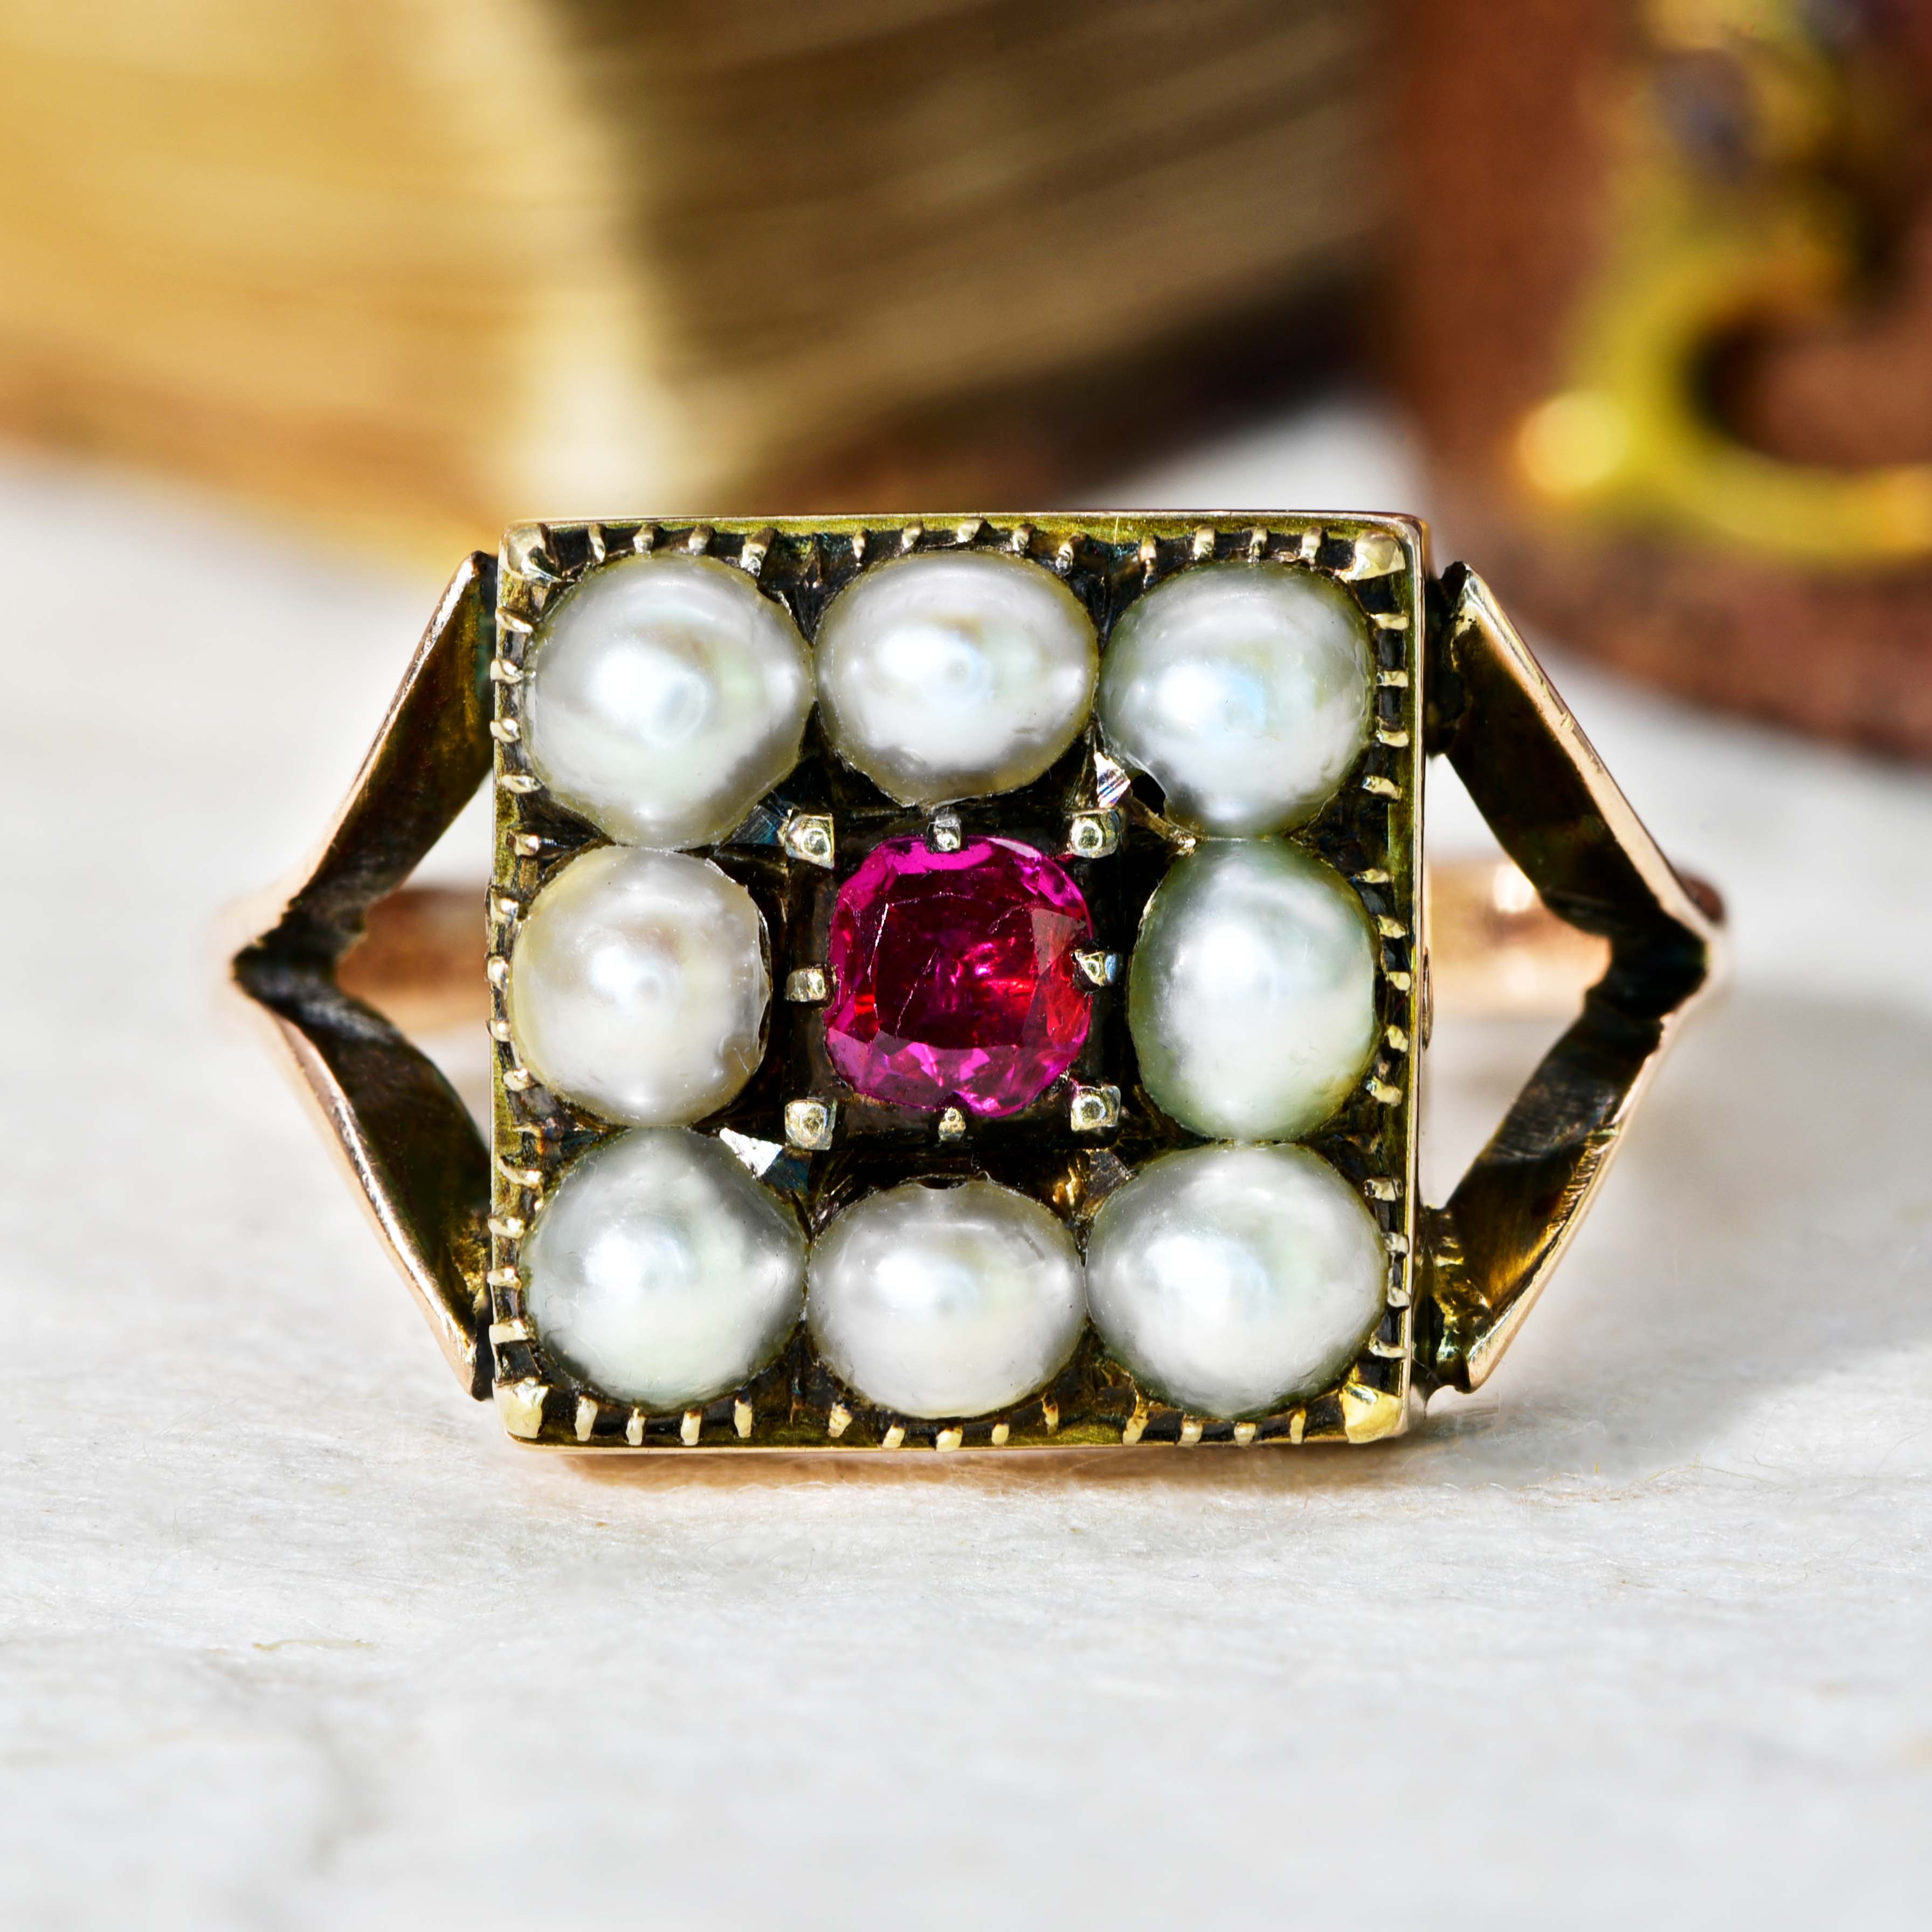 The Antique Early 19th Century Pearl and Red Gemstone Cluster Ring - Antique Jewellers